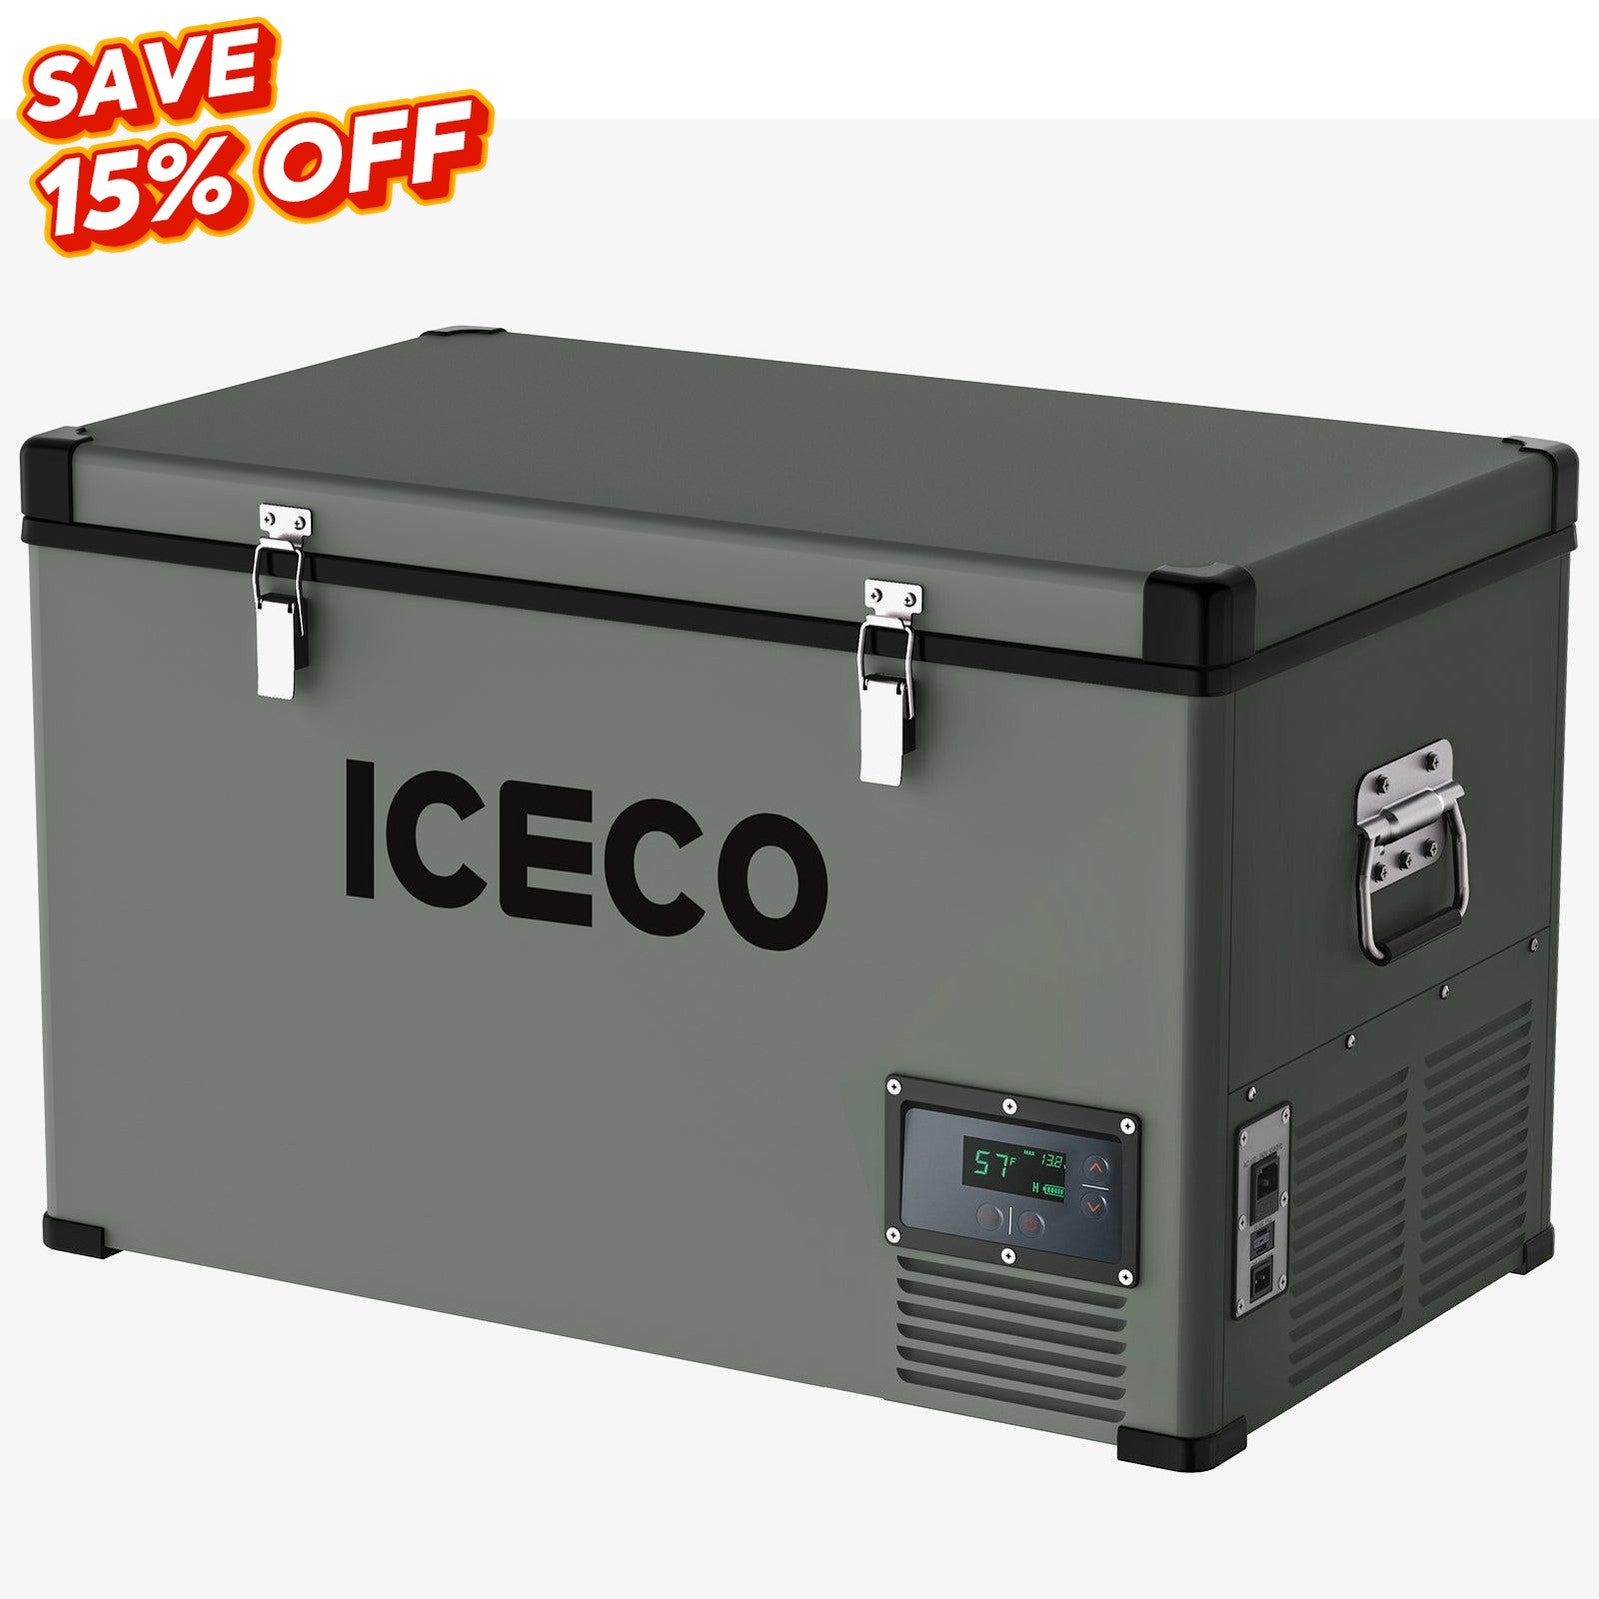 iceco fridge、plug in cooler、thermoelectric cooling、rv fridge 12v